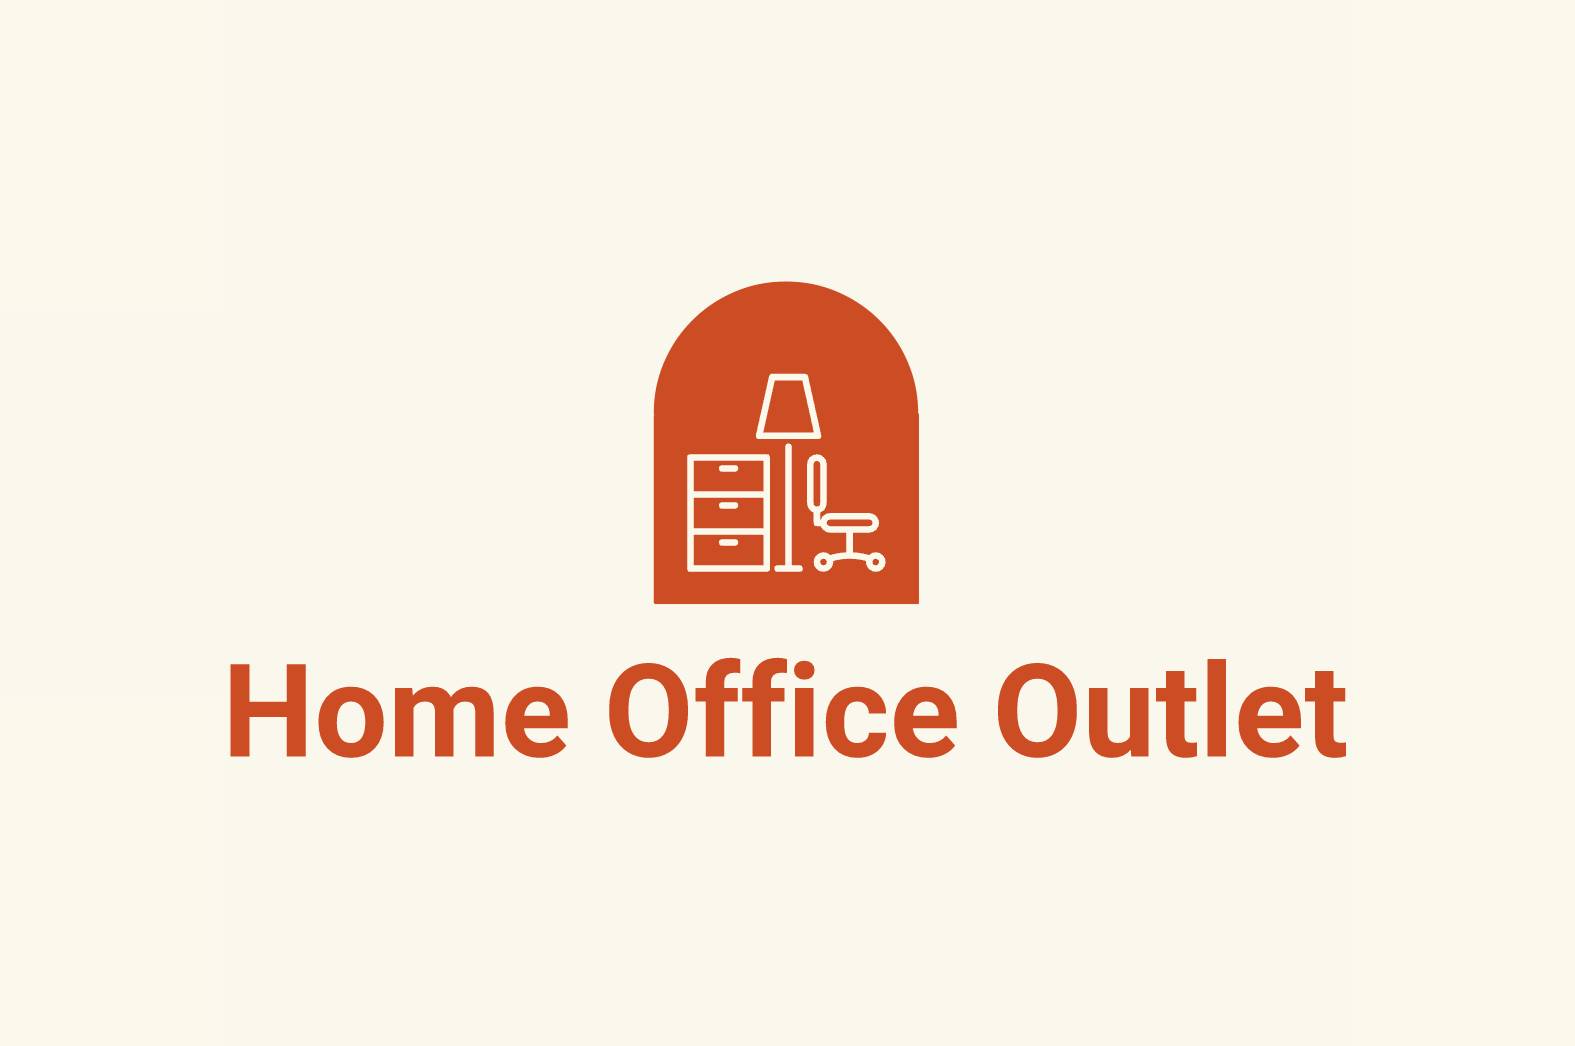 Home Office Outlet